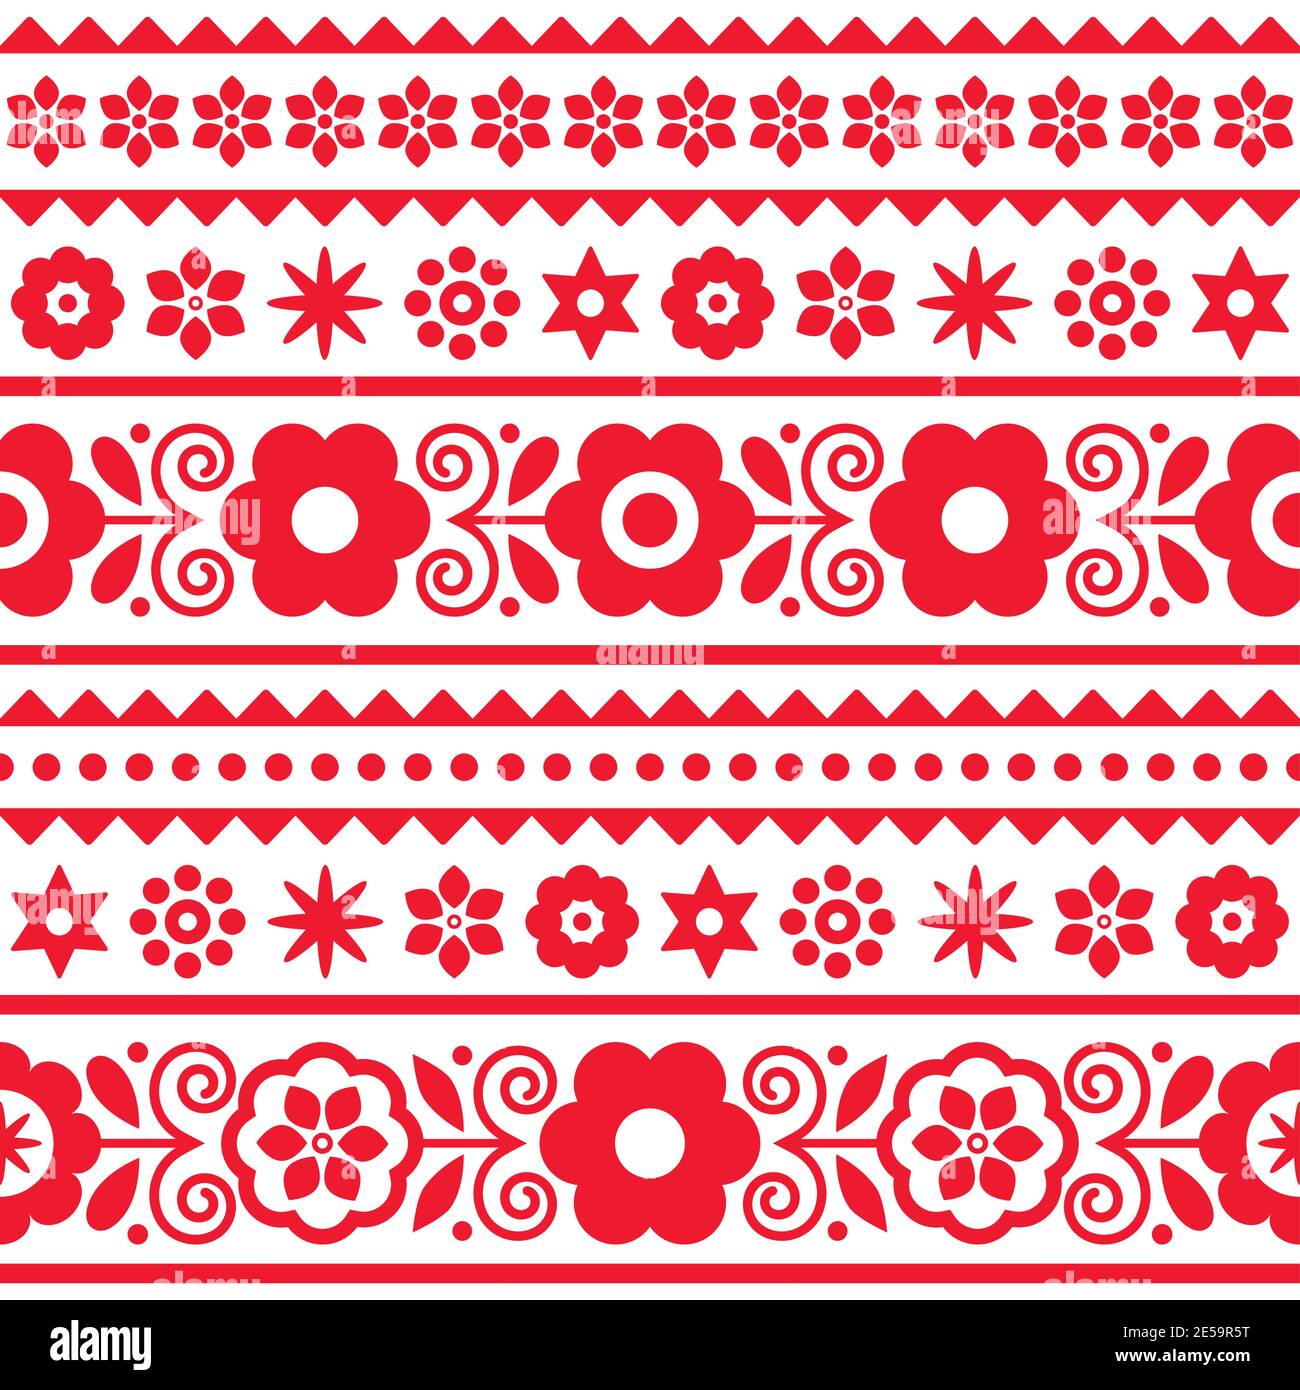 Polish traditional folk art vector seamless textile or fabric print pattern with floral motif - Lachy Sadeckie Stock Vector